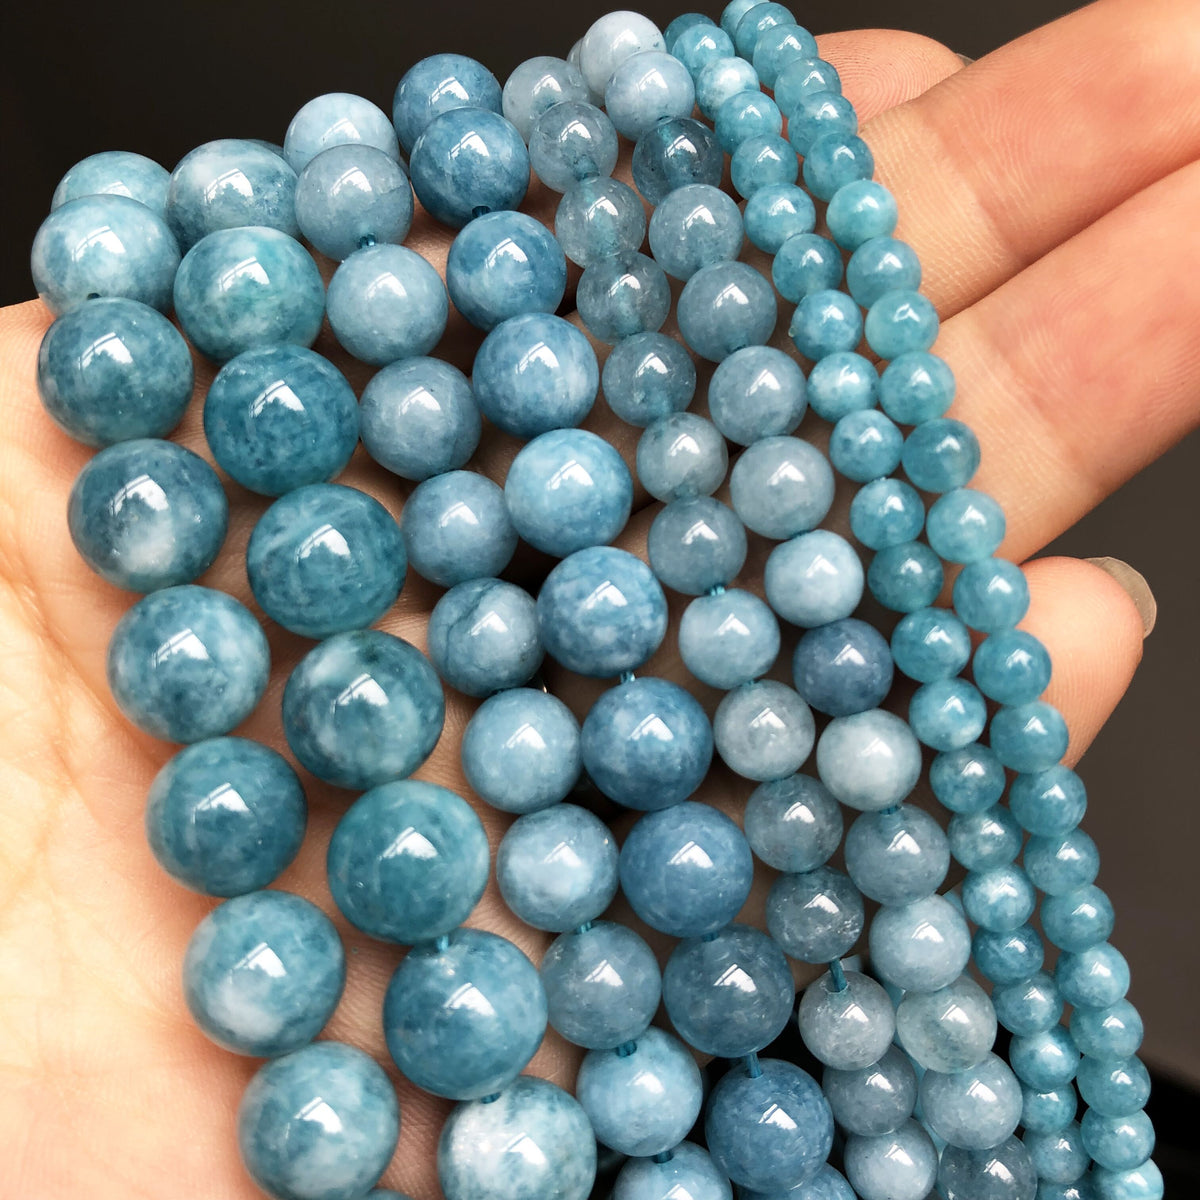 Natural Stone Dark Blue Chalcedony Jades Beads Round Loose Spacer Beads For Jewelry Making 4/6/8/10/12mm DIY Handmade Bracelets